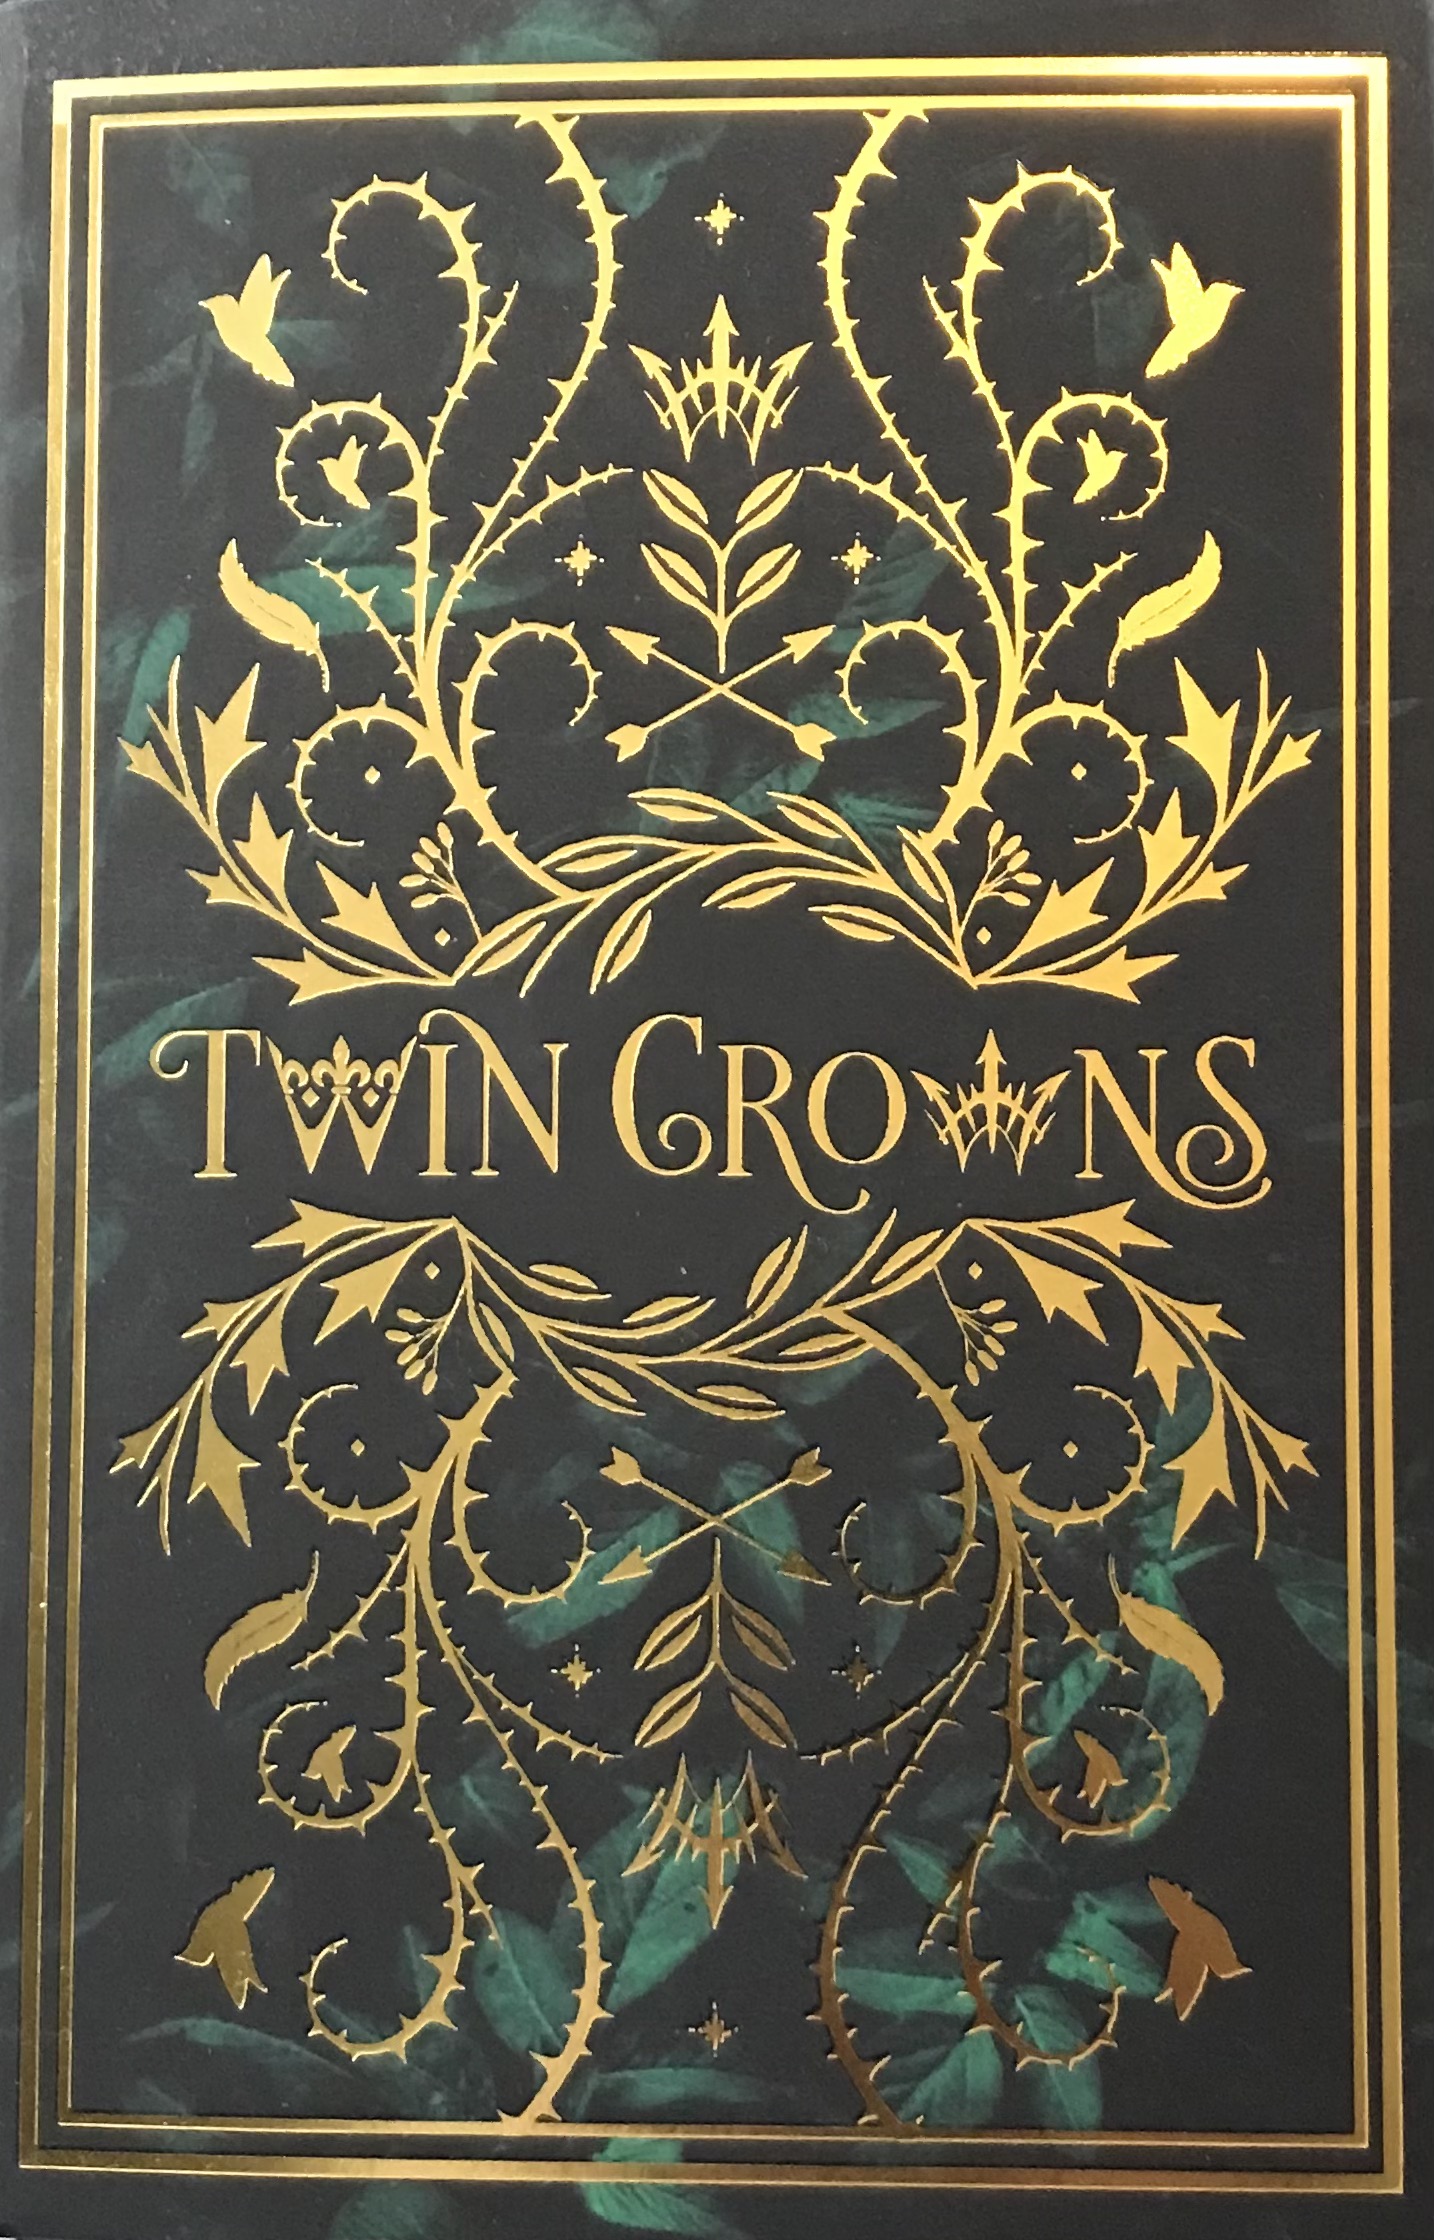 Twin Crowns by Catherine Doyle and Katherine Webber